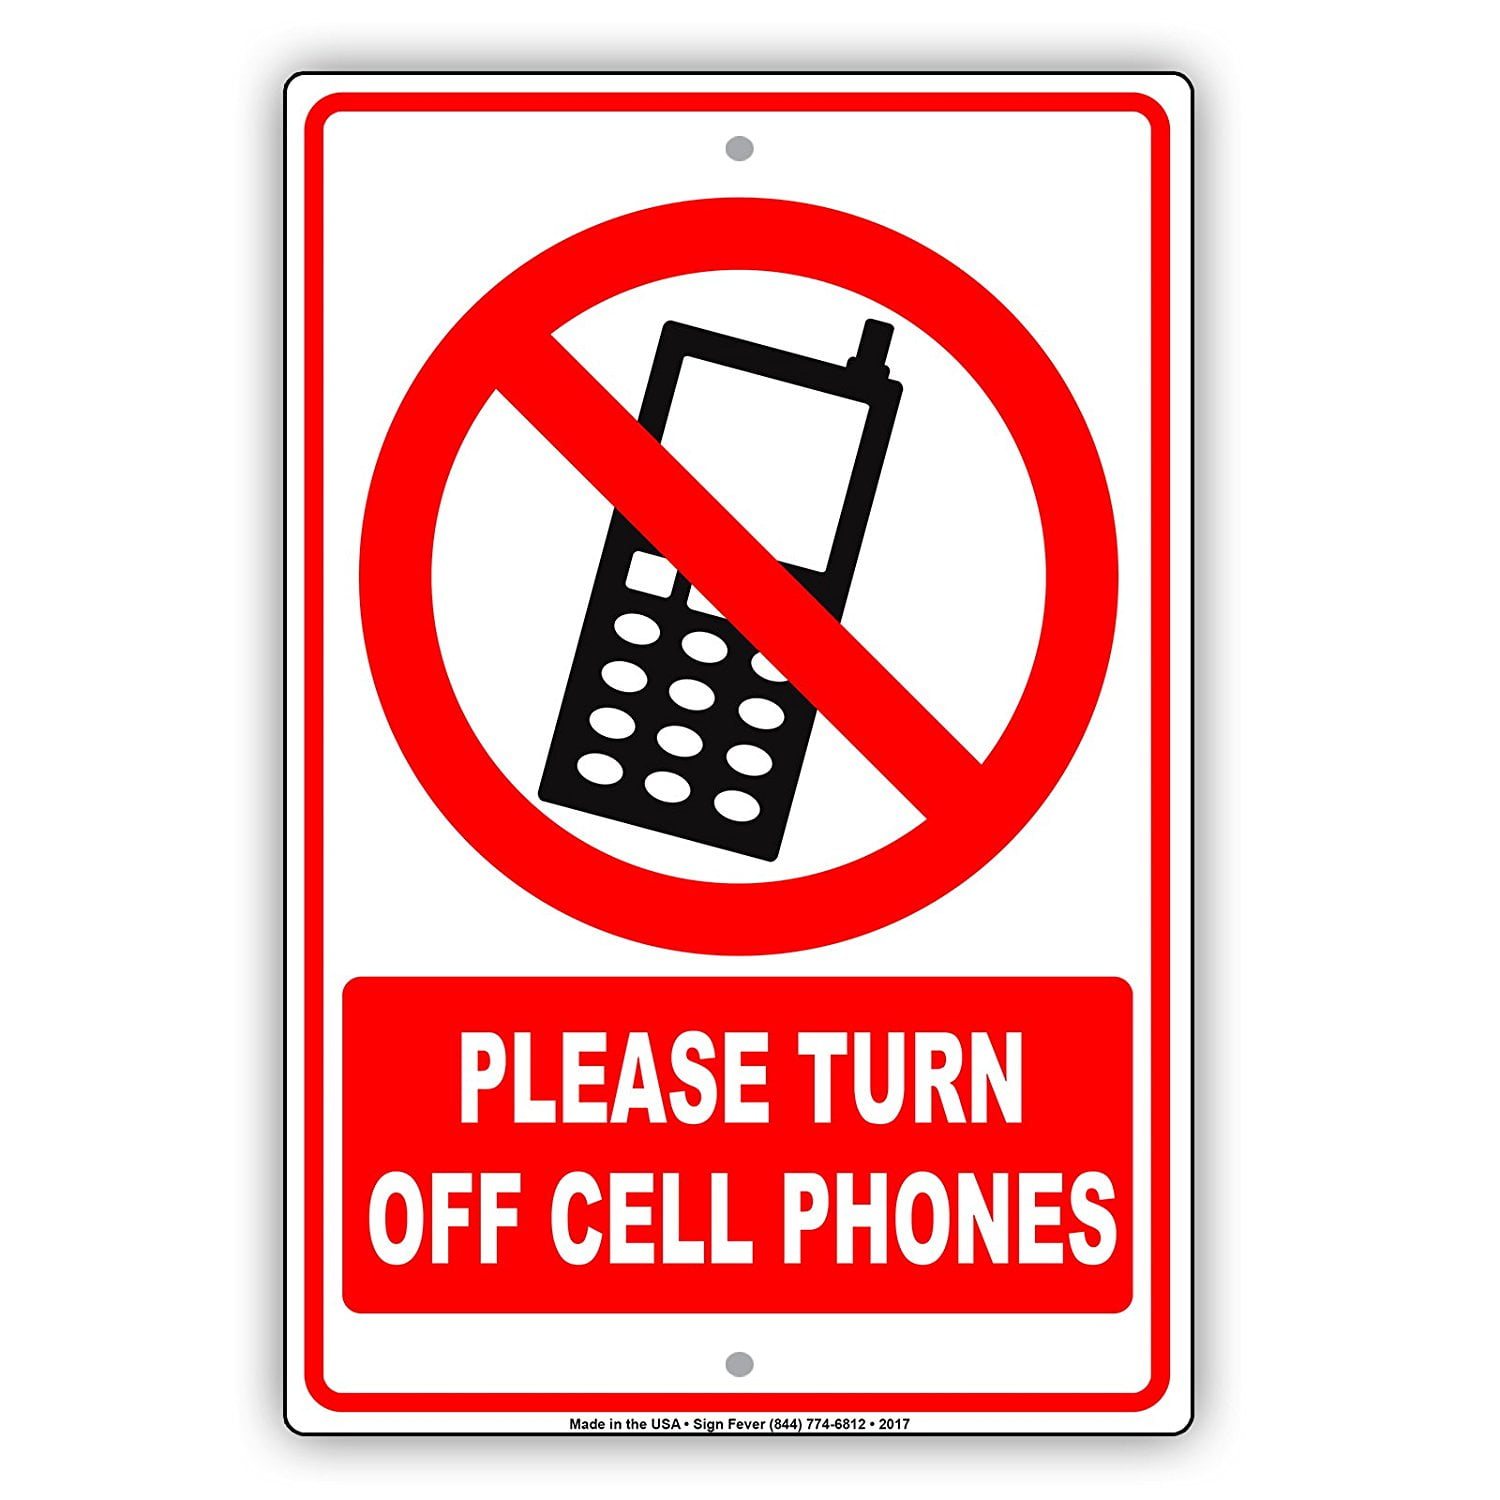 Please Turn Off Cell Phones With Graphic Restriction Caution Alert